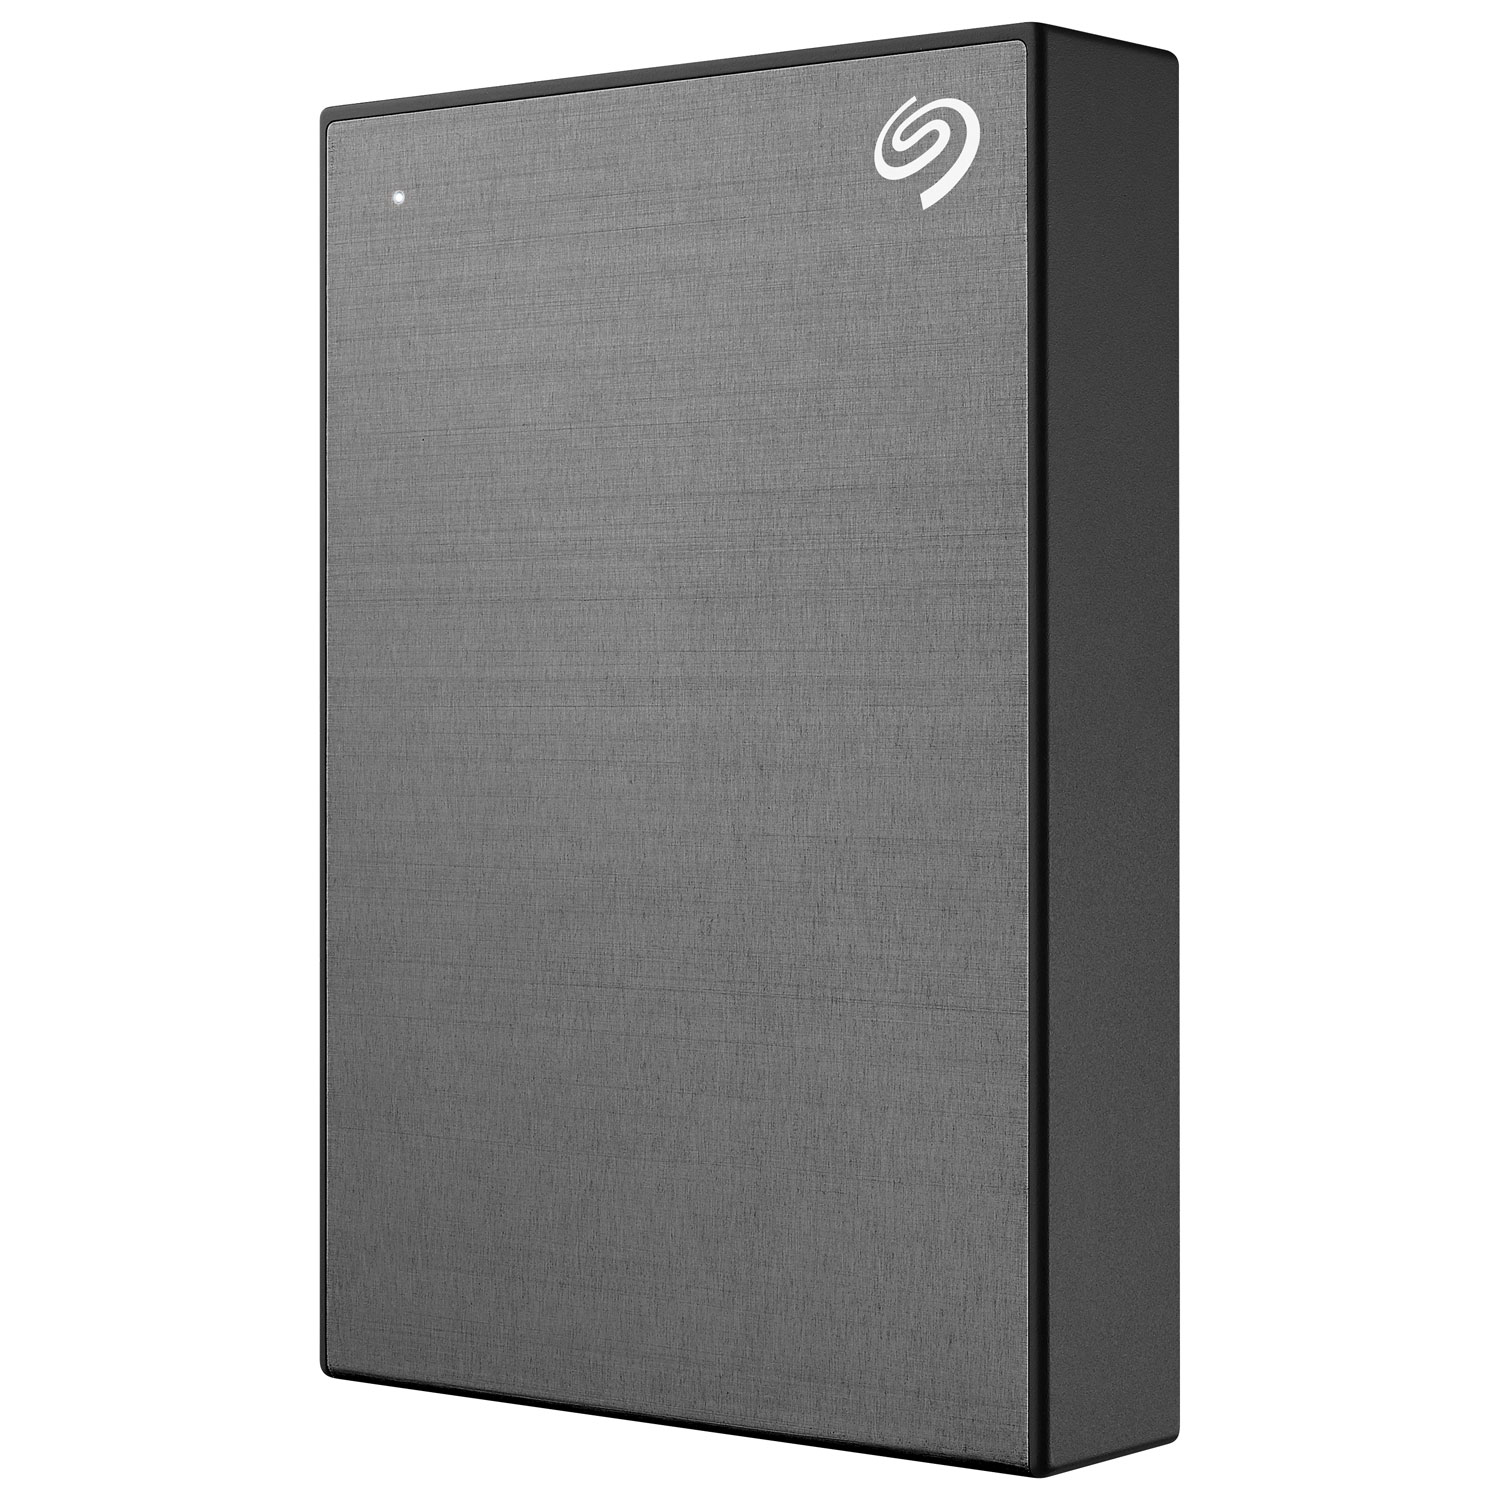 Seagate One Touch 5TB USB 3.0 Portable External Hard Drive (STKC5000404) - Grey